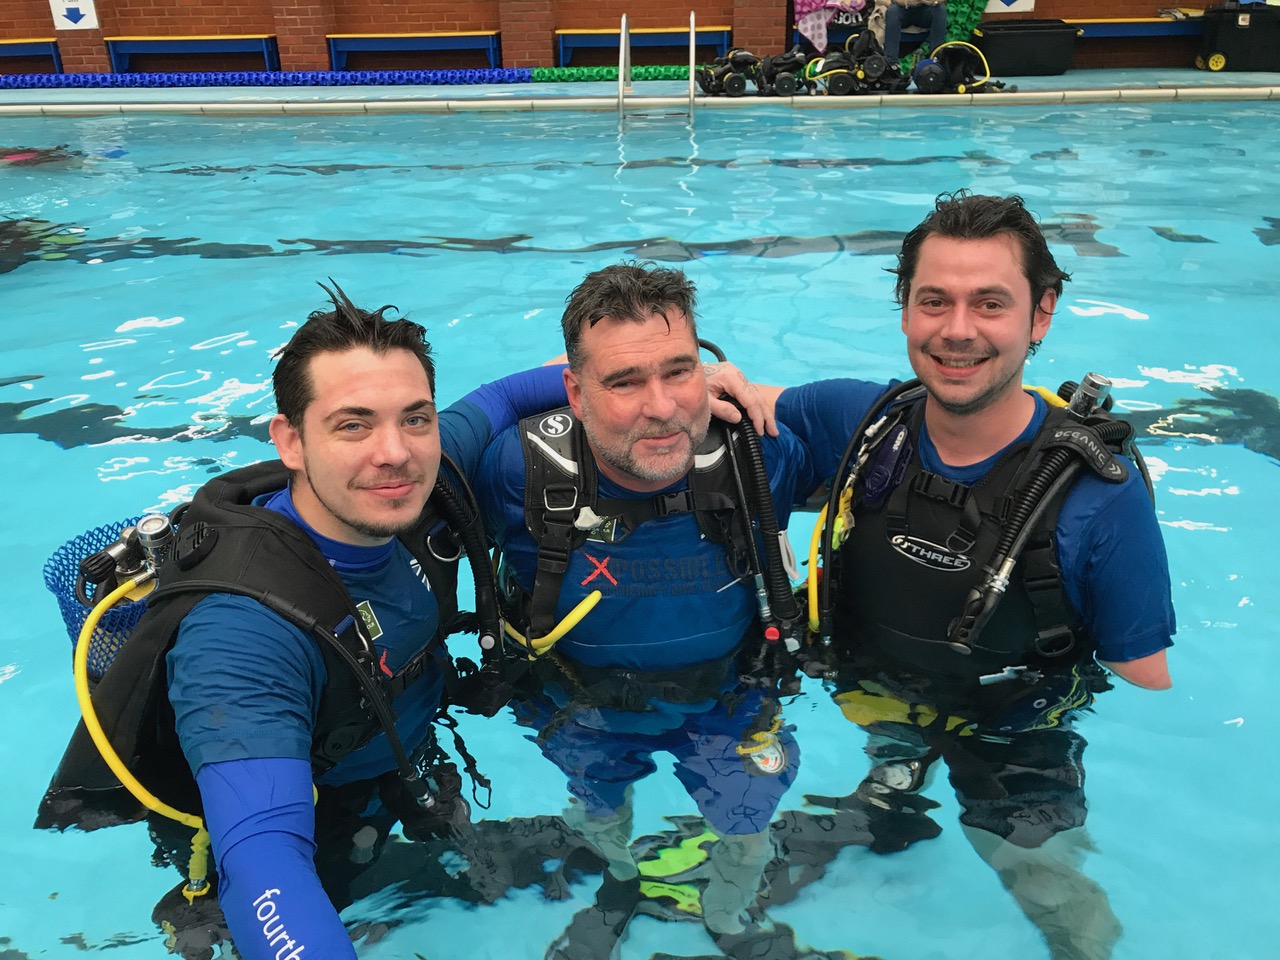 Gary, Colin and Chris post-dive